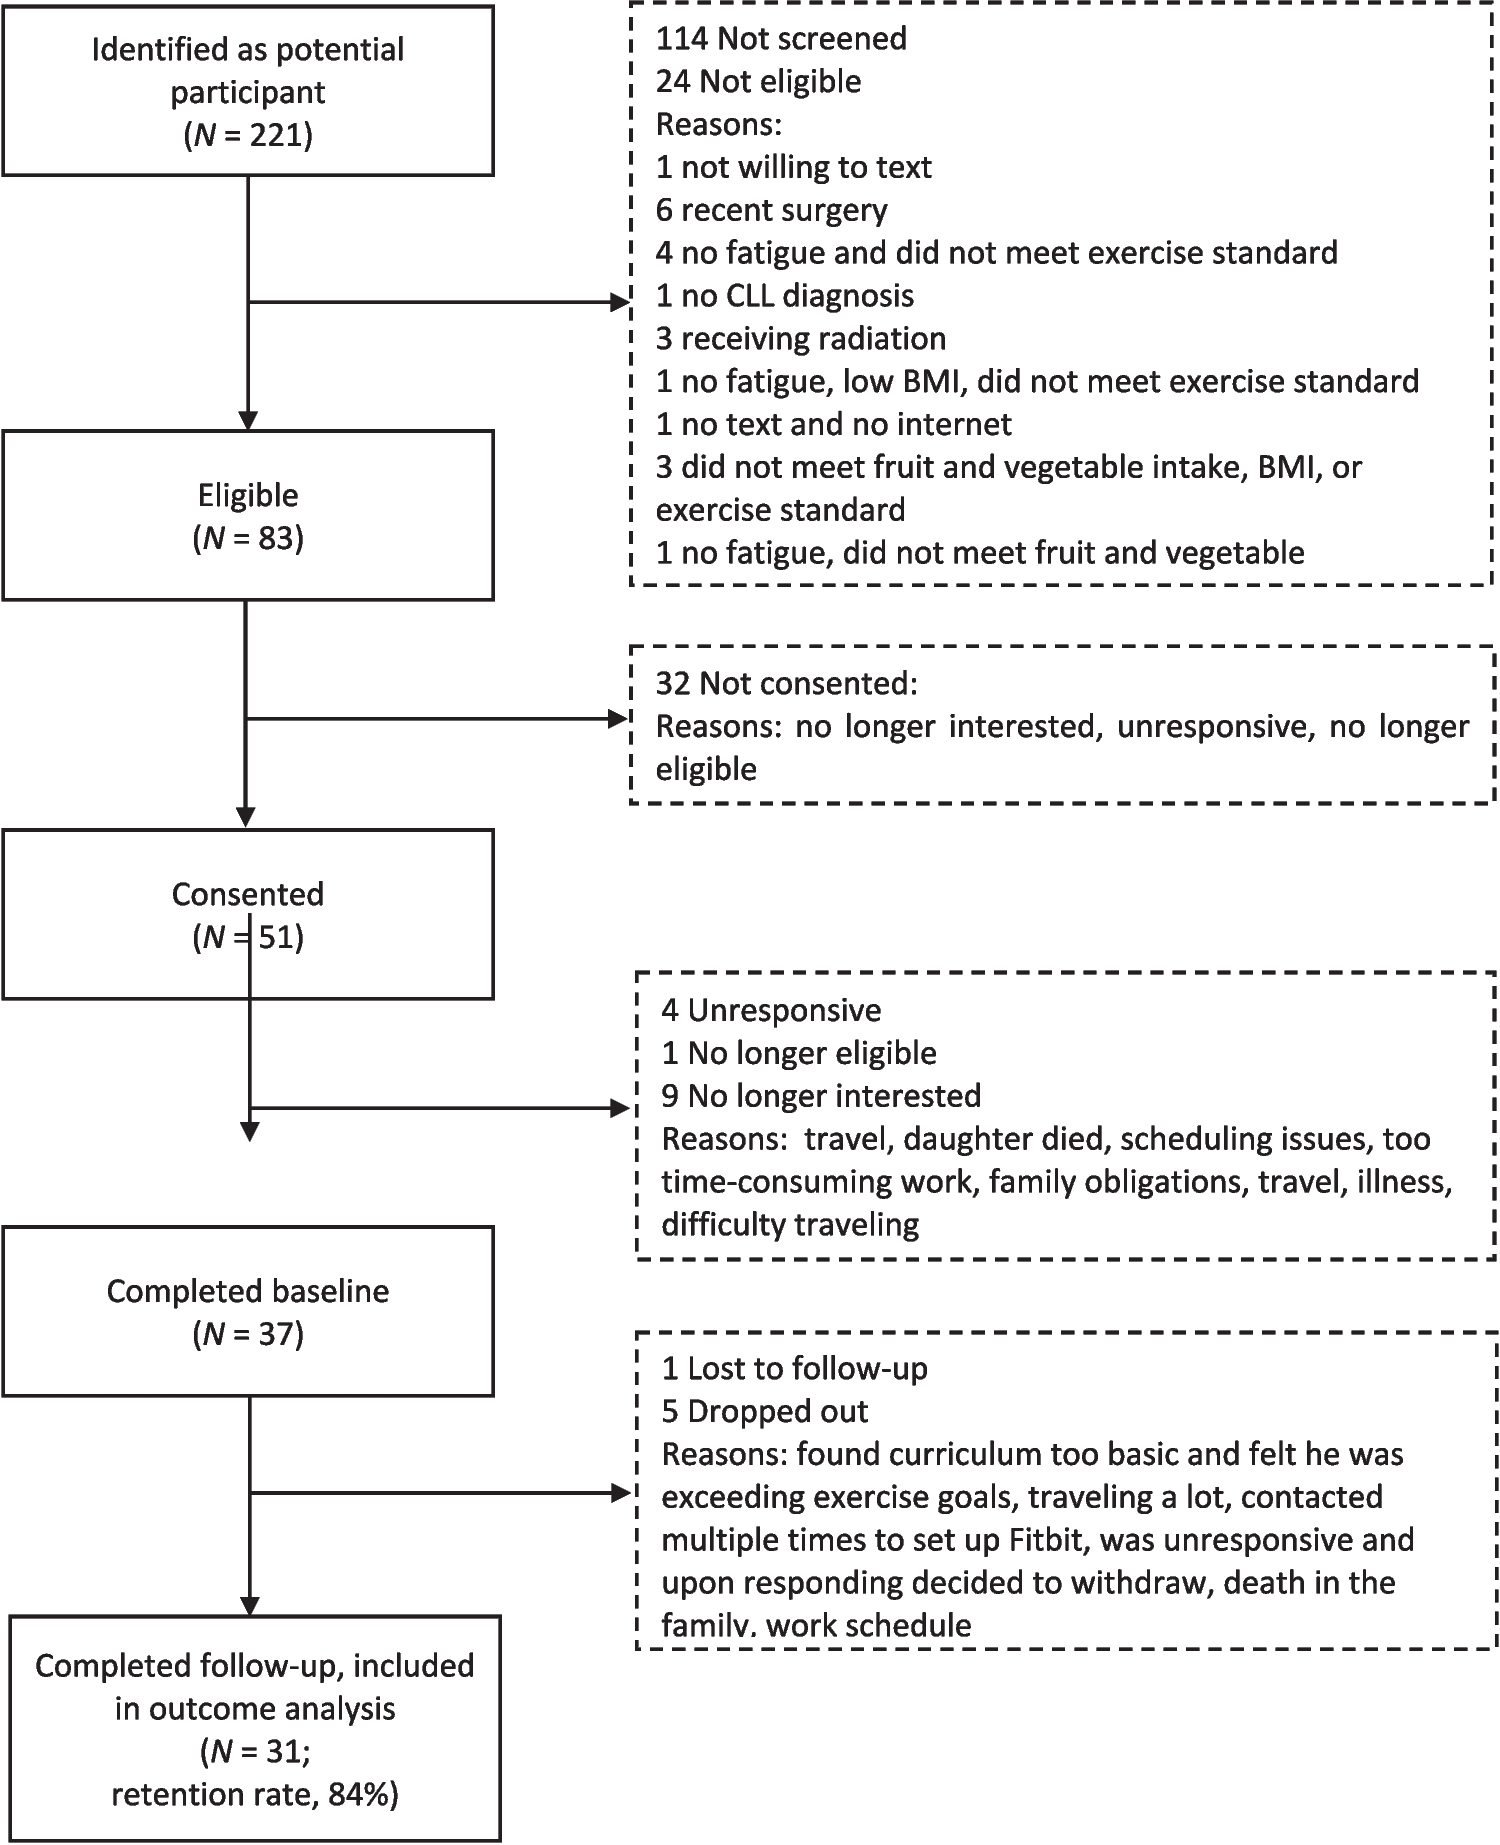 Optimization of mHealth behavioral interventions for patients with chronic lymphocytic leukemia: the HEALTH4CLL study